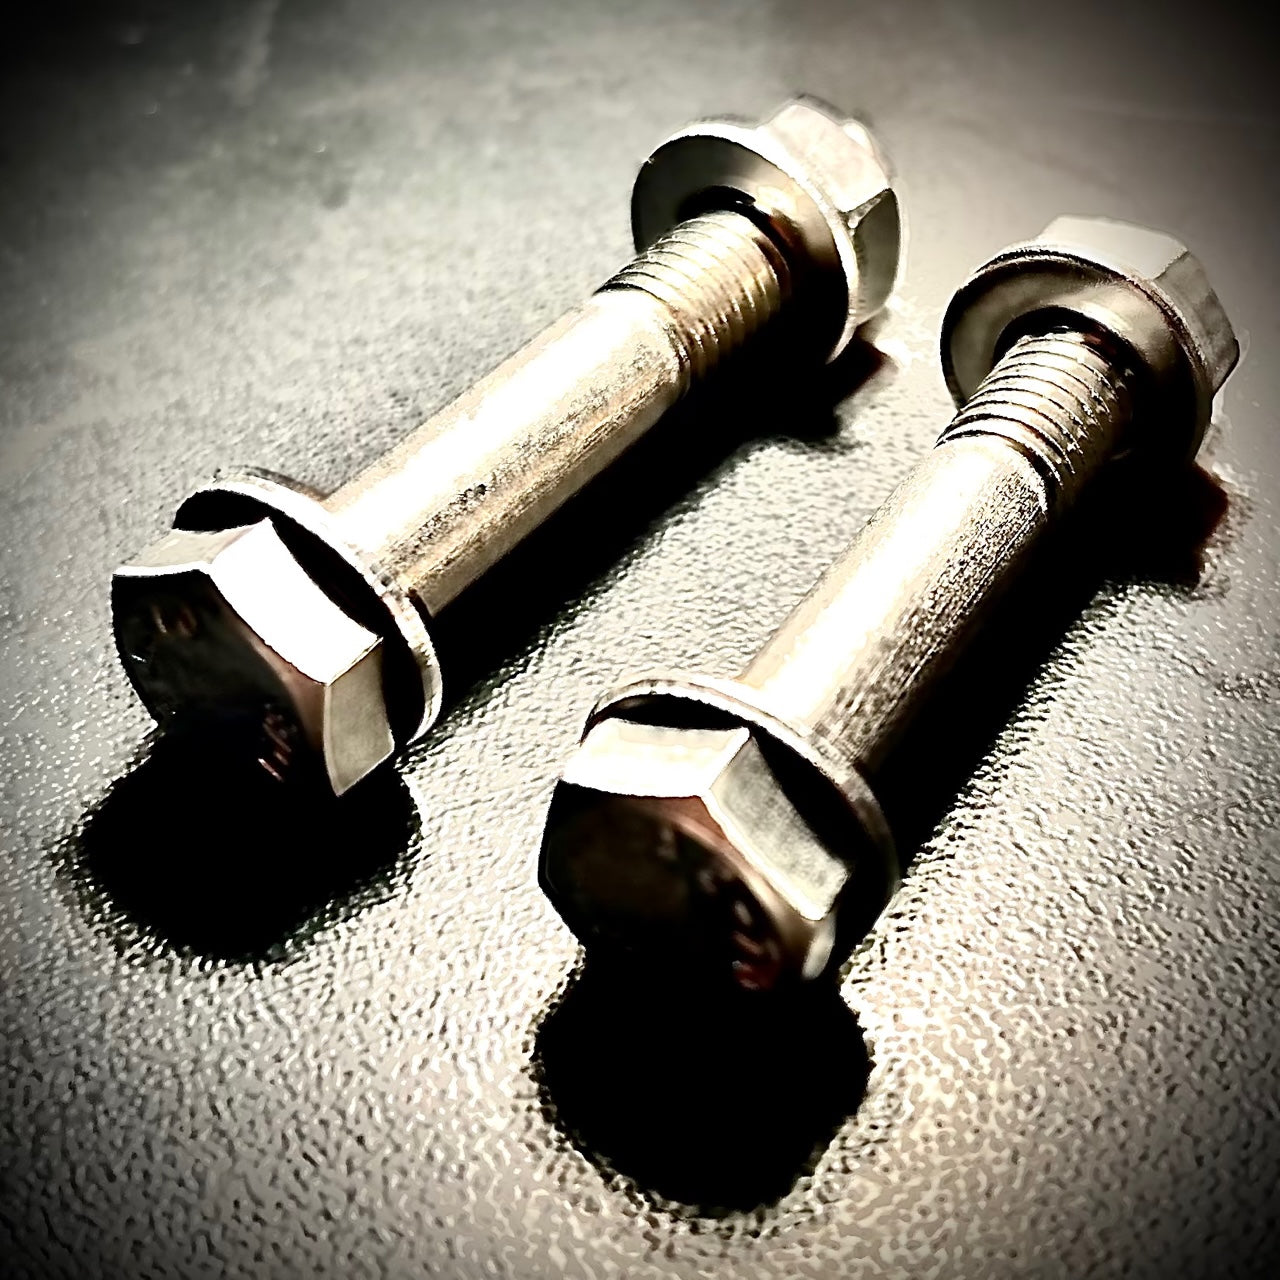 M12 x Over 120mm Hex Bolt plus Nut and Washers A2/ 304 Stainless Steel DIN 931 - Fixaball Ltd. Fixings and Fasteners UK